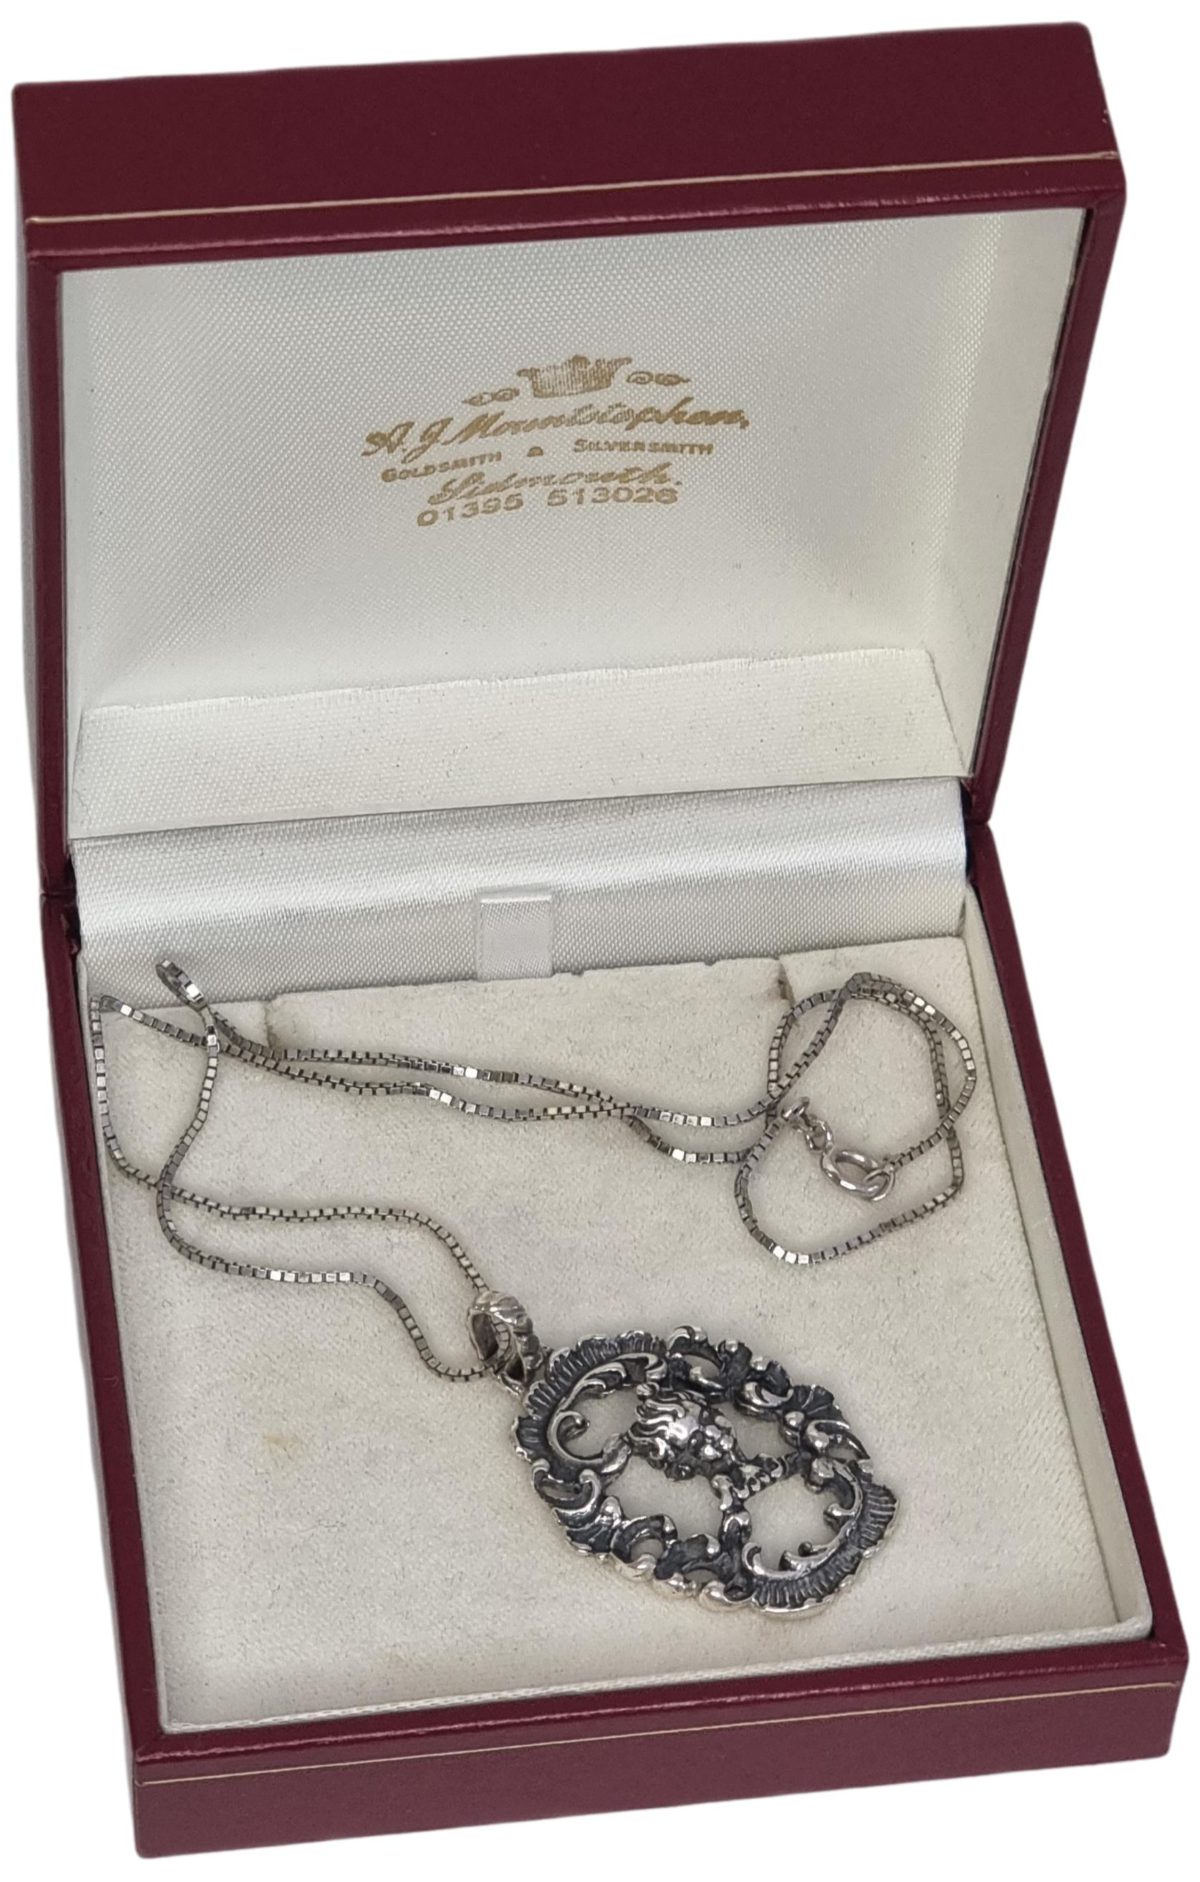 The Victorian Putti is in 925 silver and features the face of a cherub inside a decorative oval open pendant. The pendant is supported by a silver cube chain, the pendant and chain are in good condition and would make a great gift idea. Photo of necklace displayed in its box.